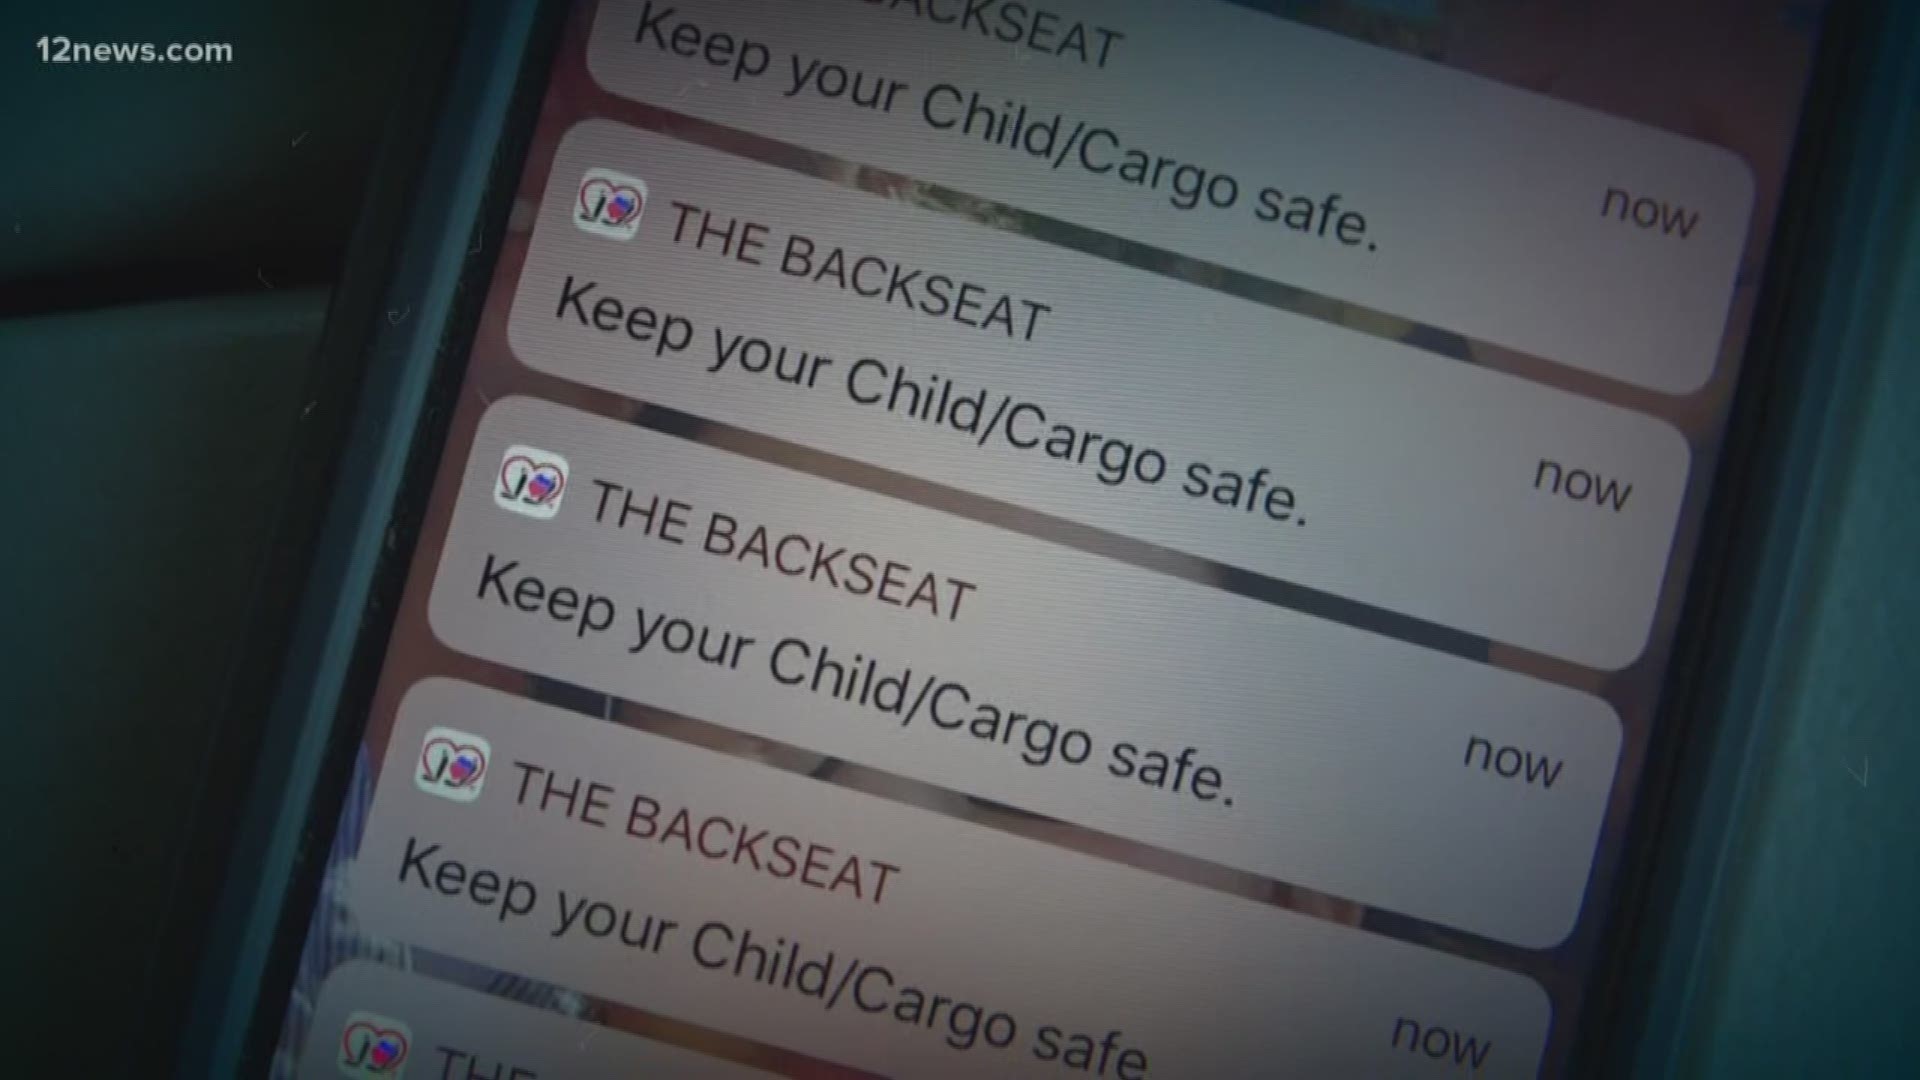 Arizona dad invents an app that prevents the death of kids left in hot cars.